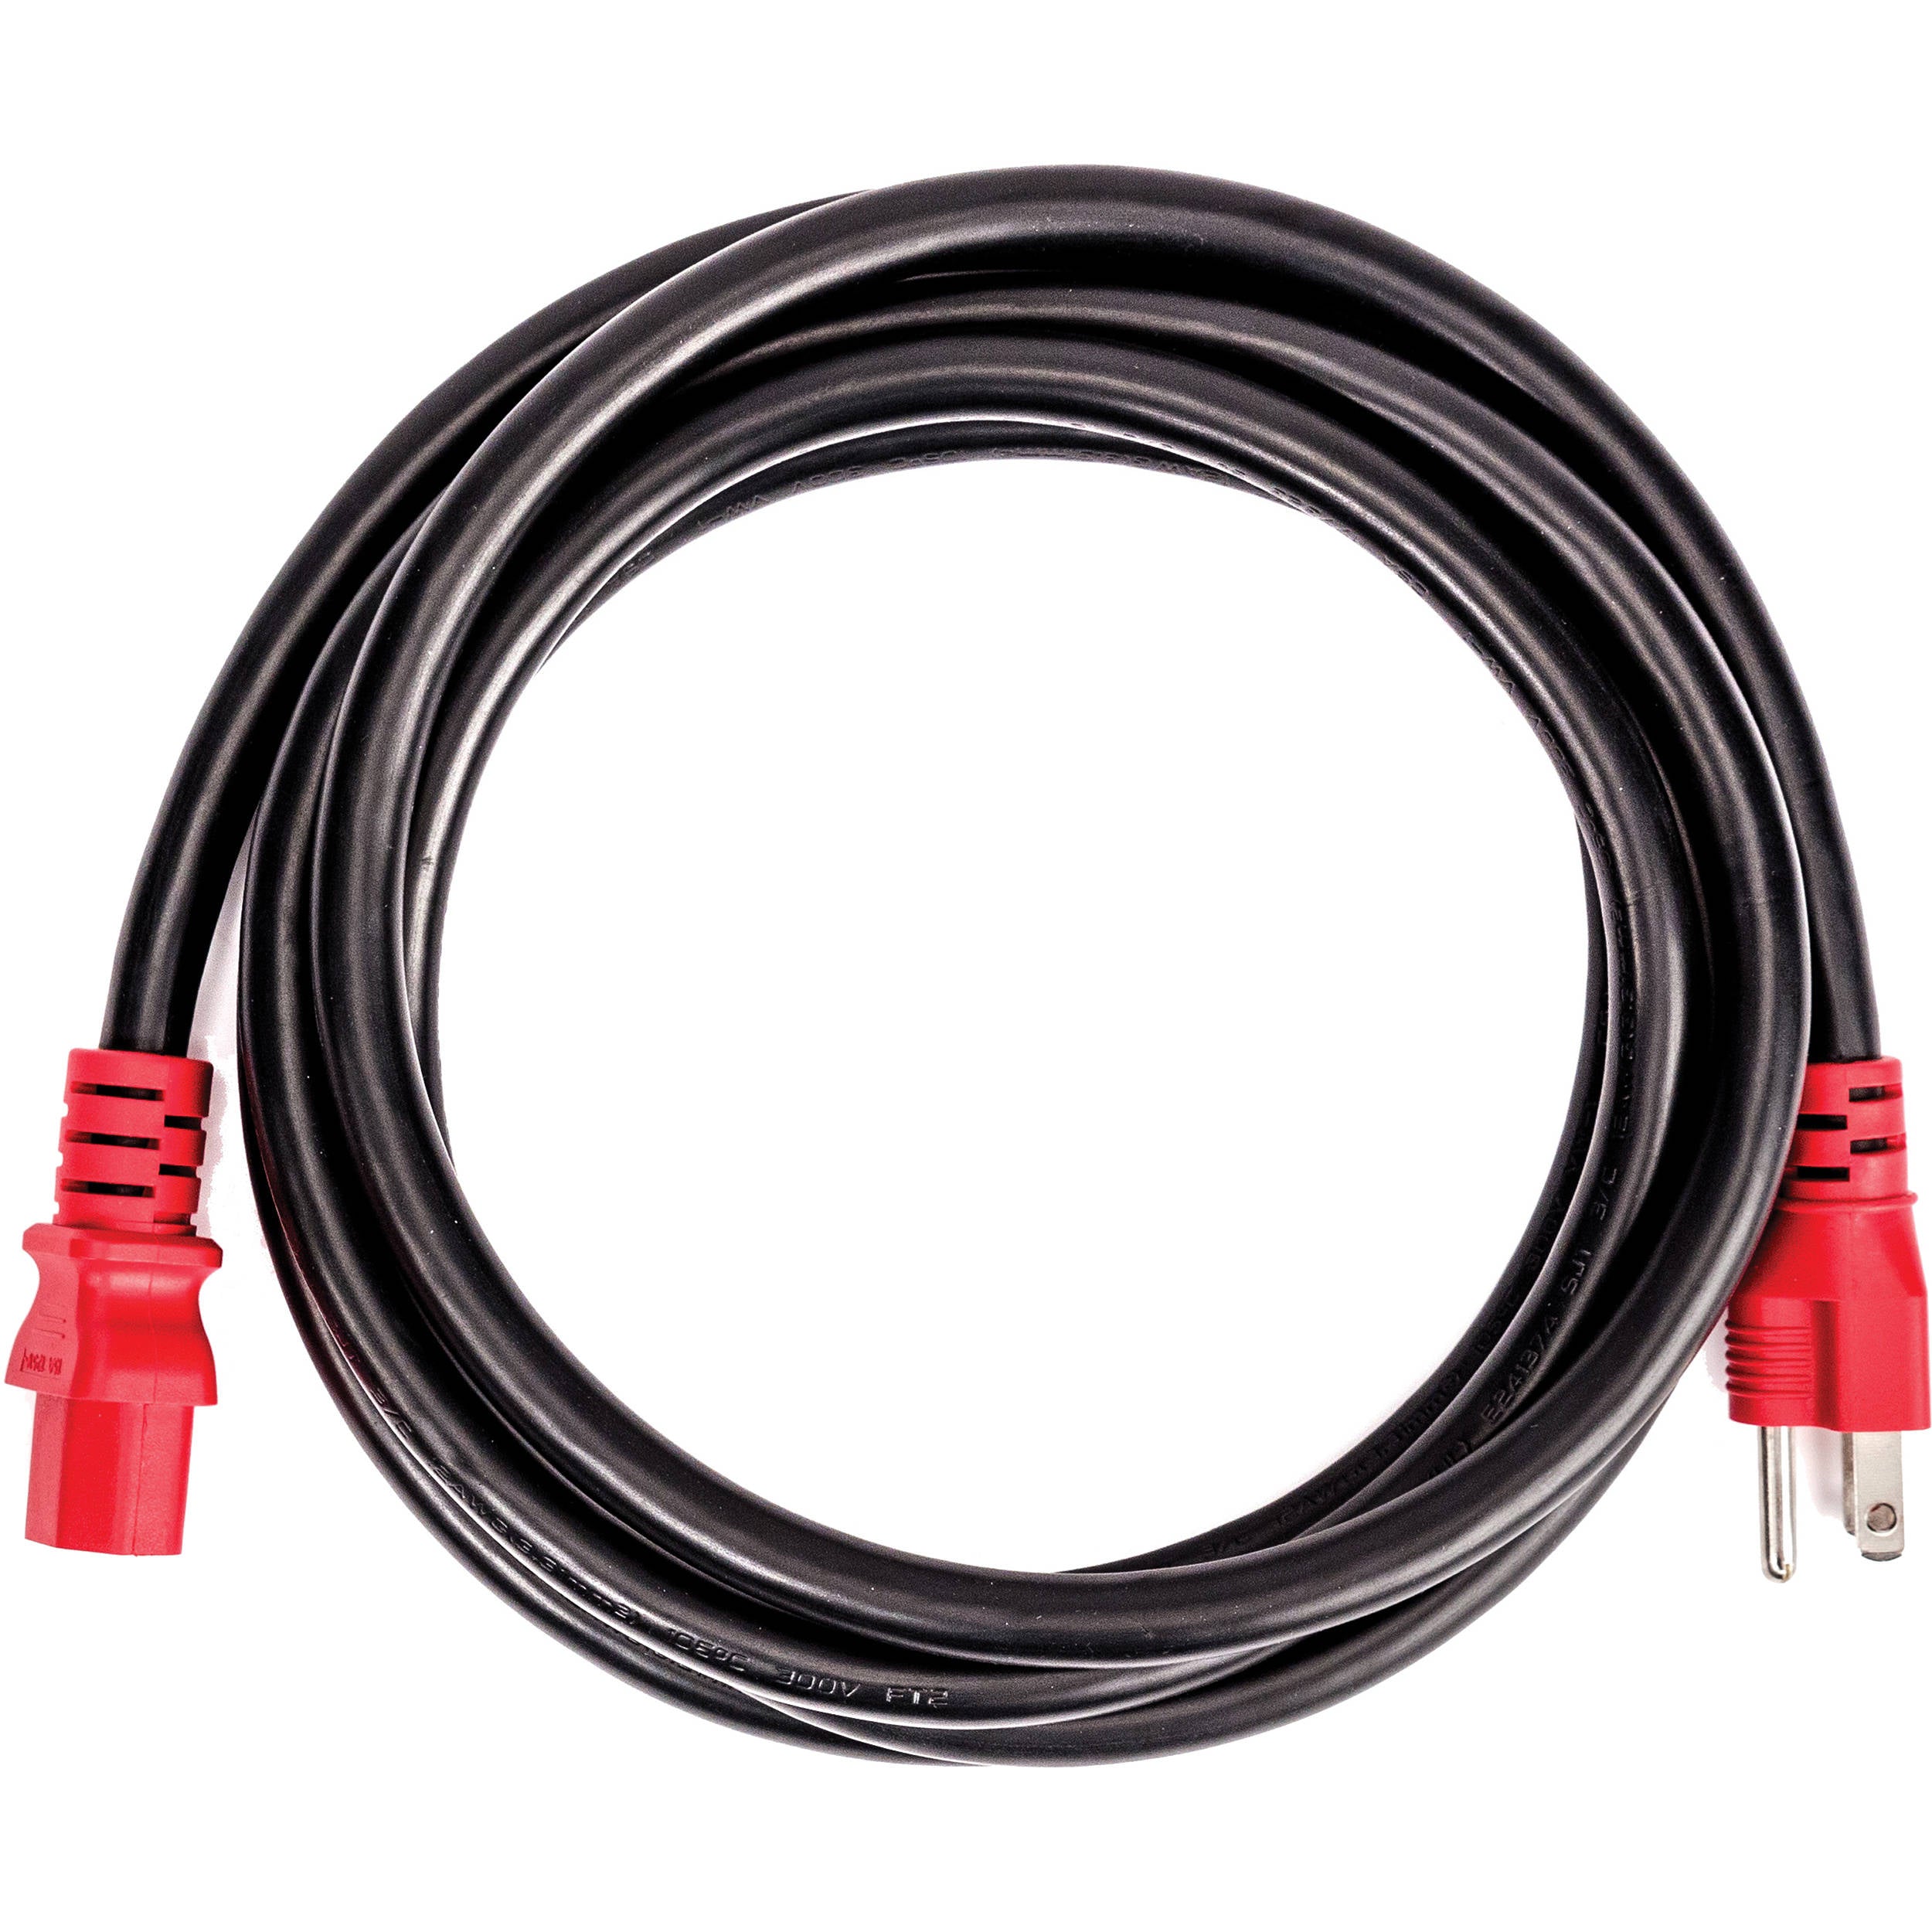 D'Addario Computers, Instruments & More IEC Power Cable -10 ft